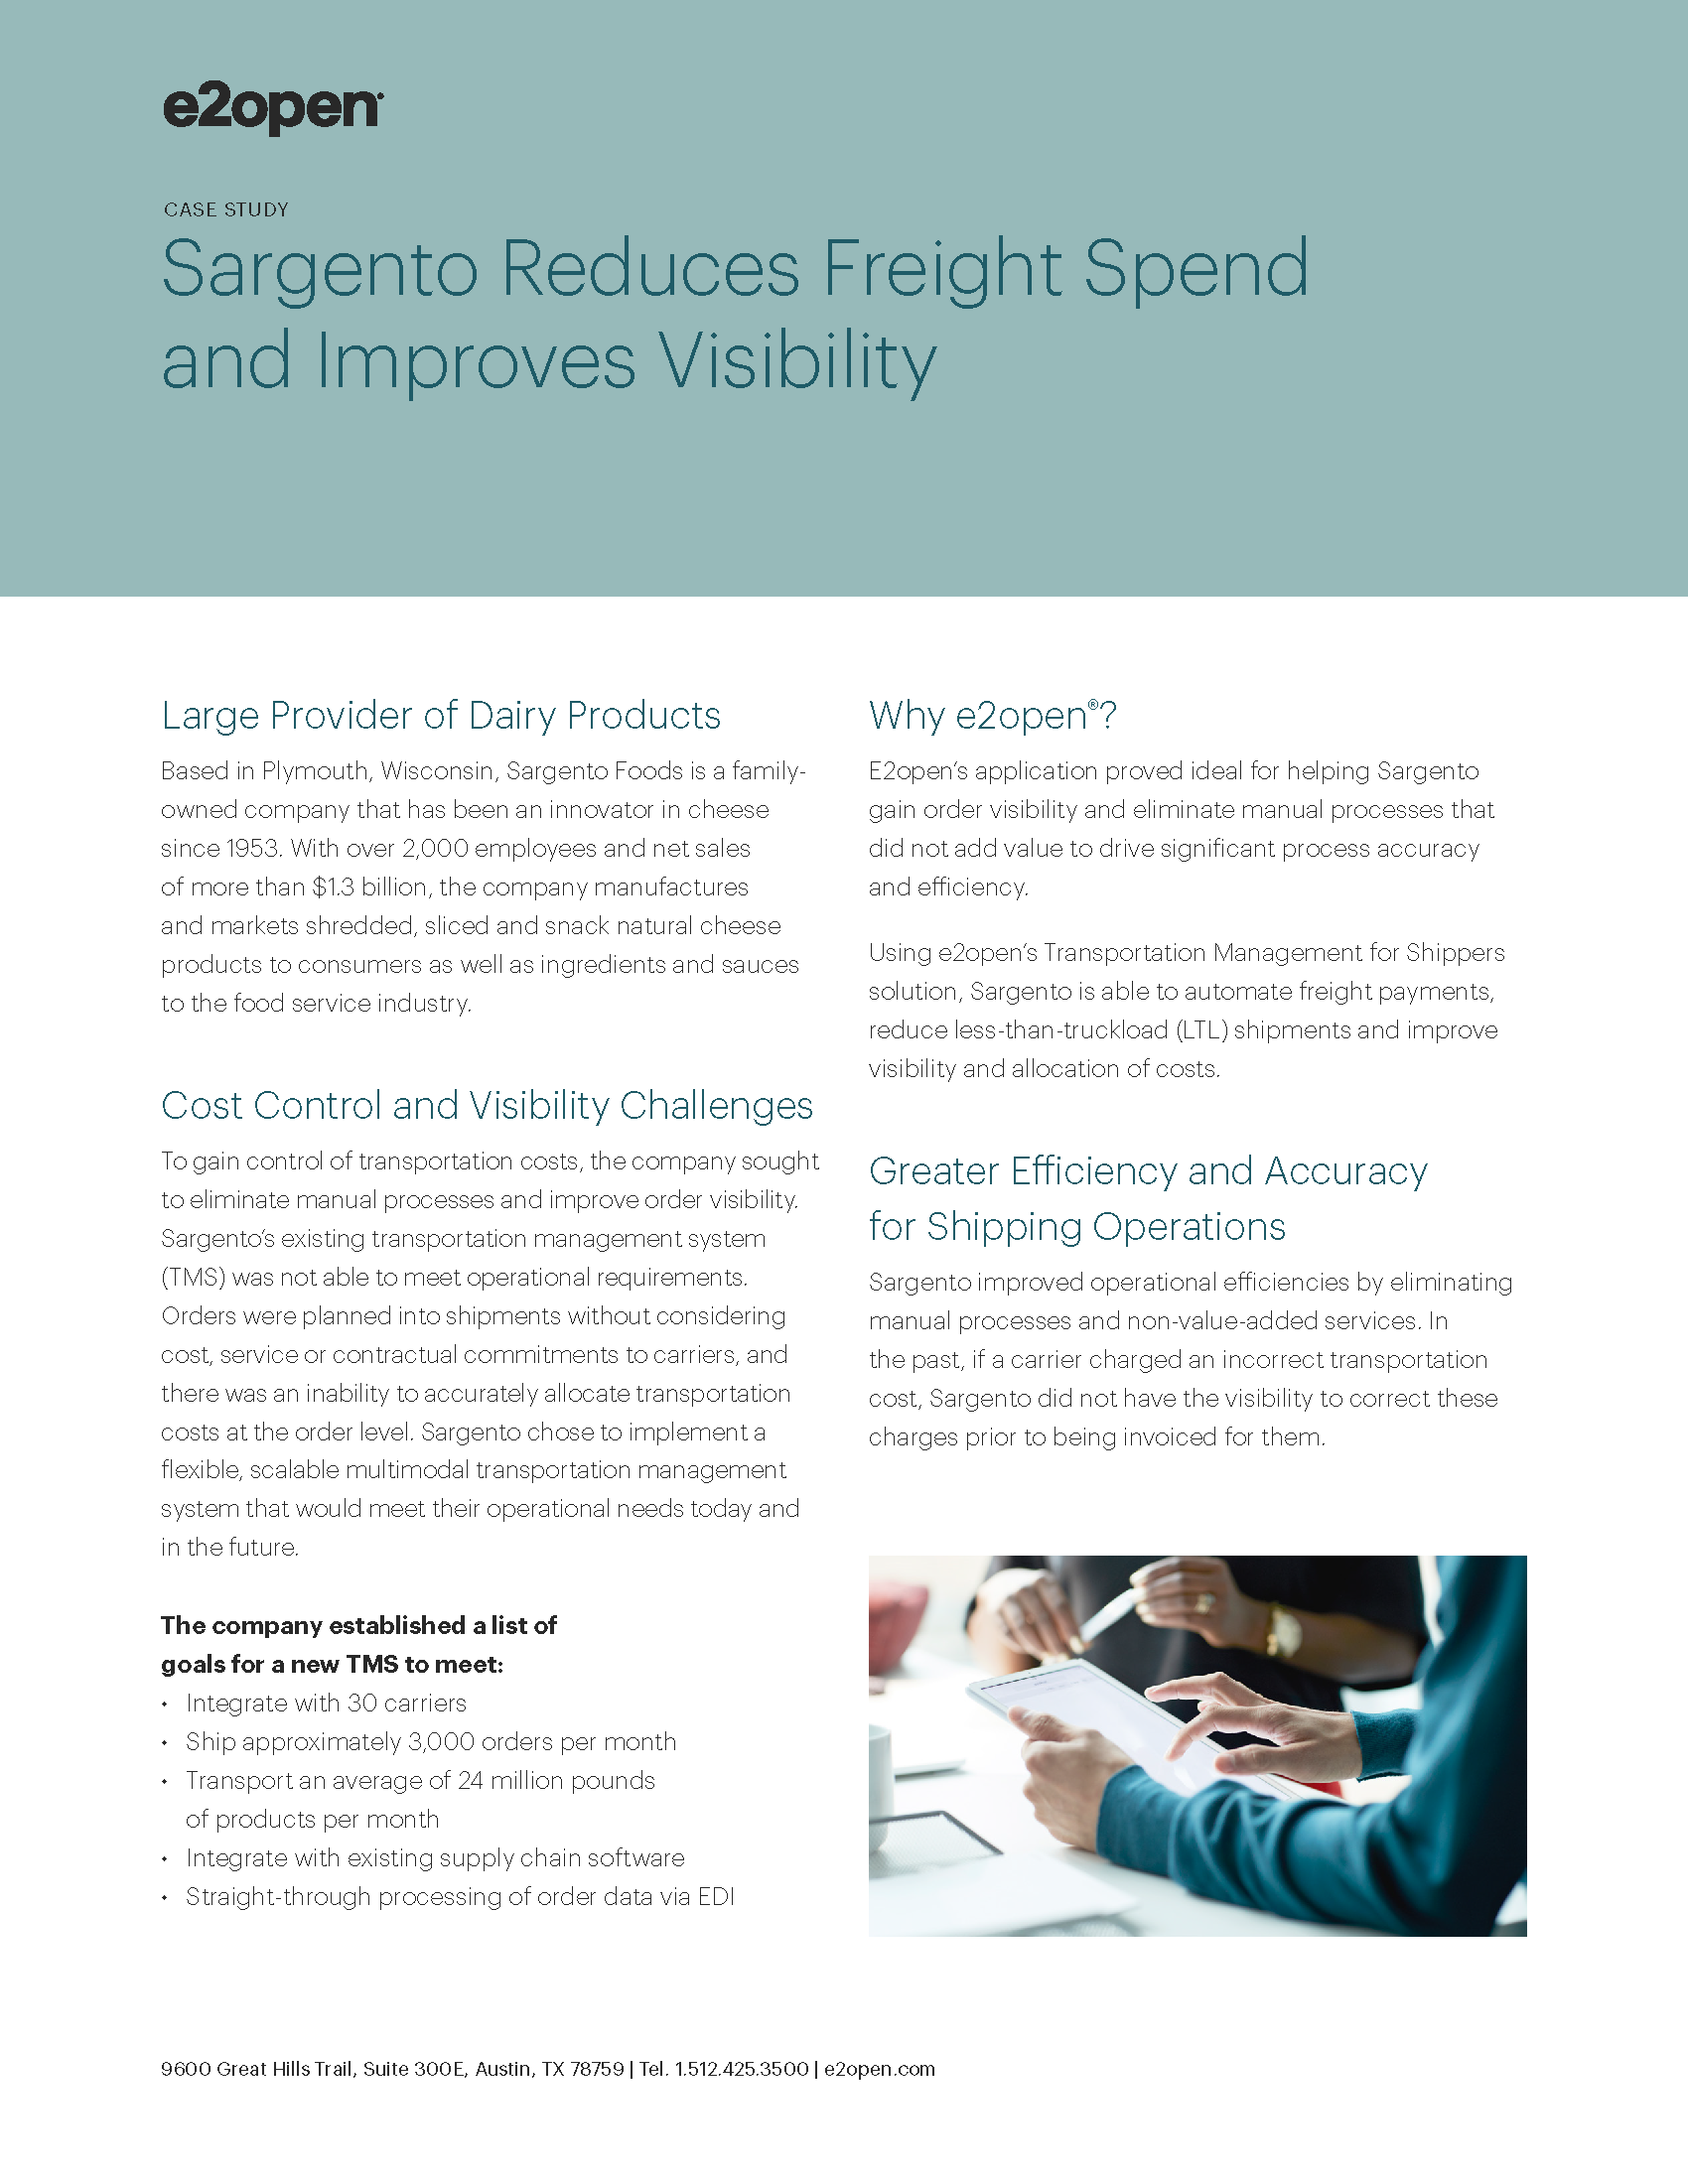 Sargento Reduces Freight Spend and Improves Visibility